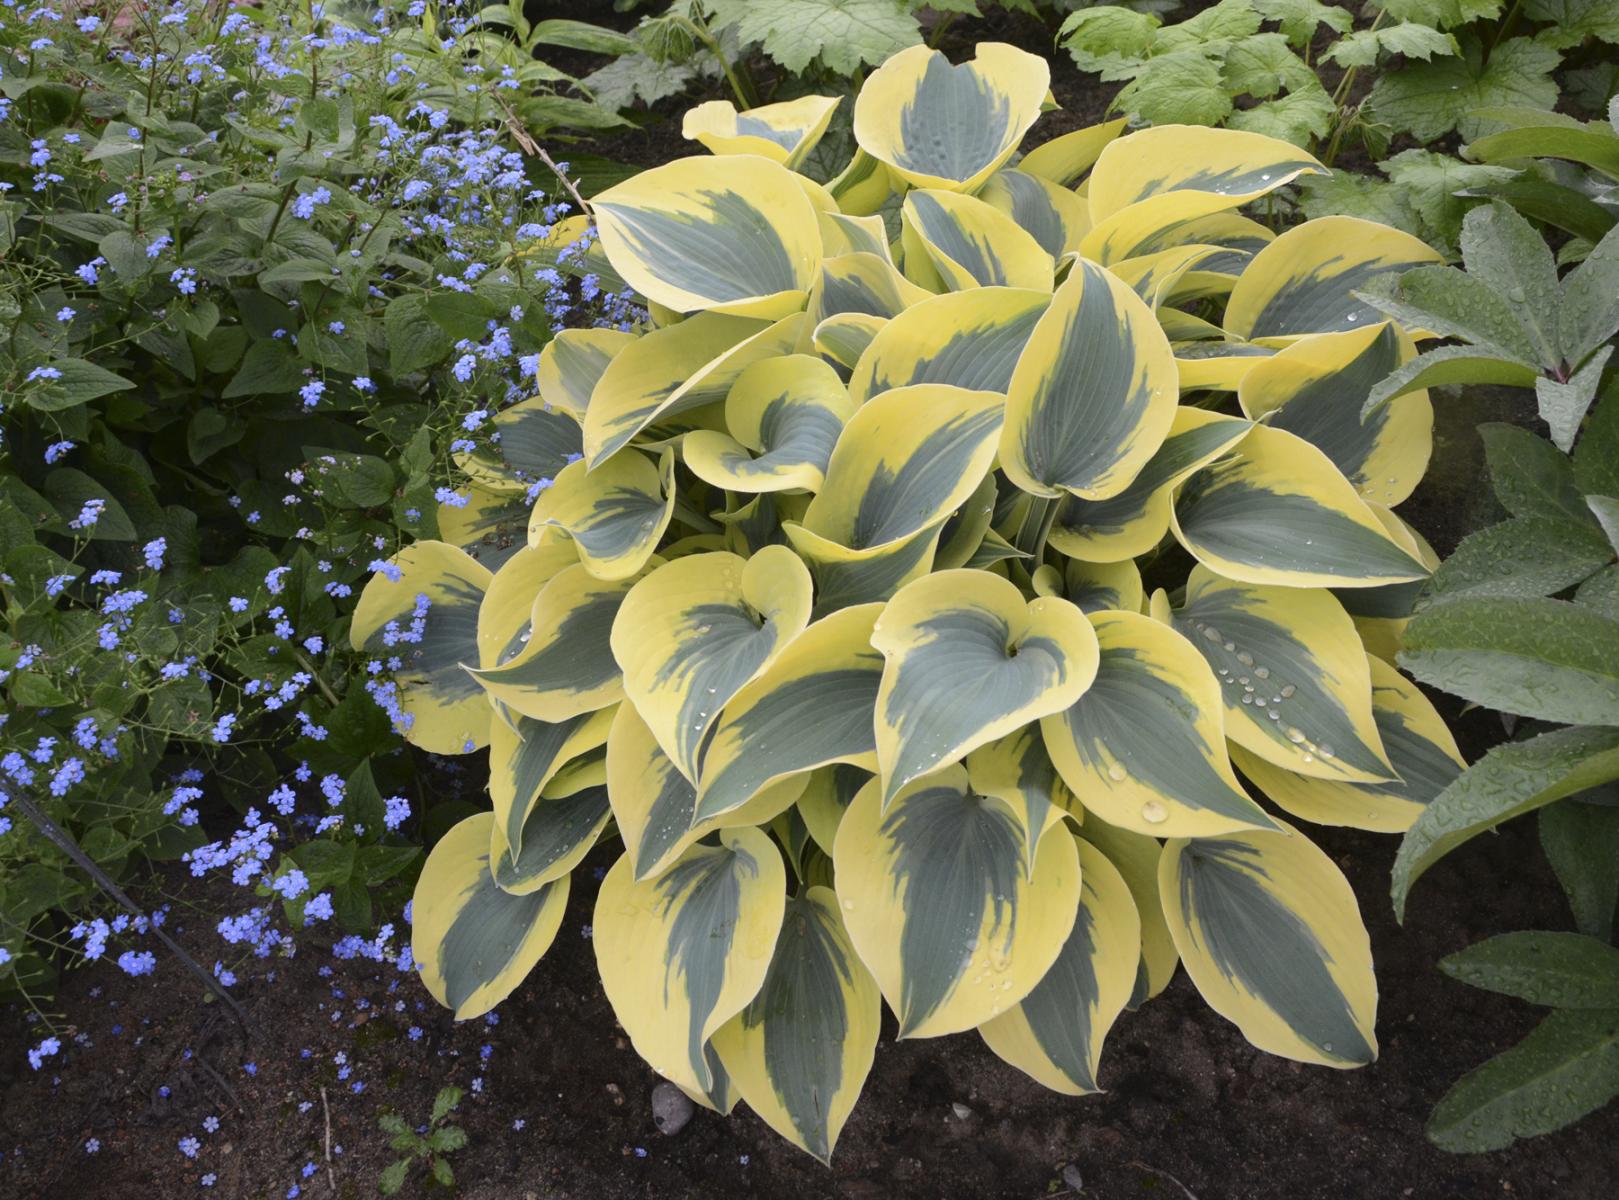 Image of Hosta 'Autumn Frost' from Walters Gardens. 